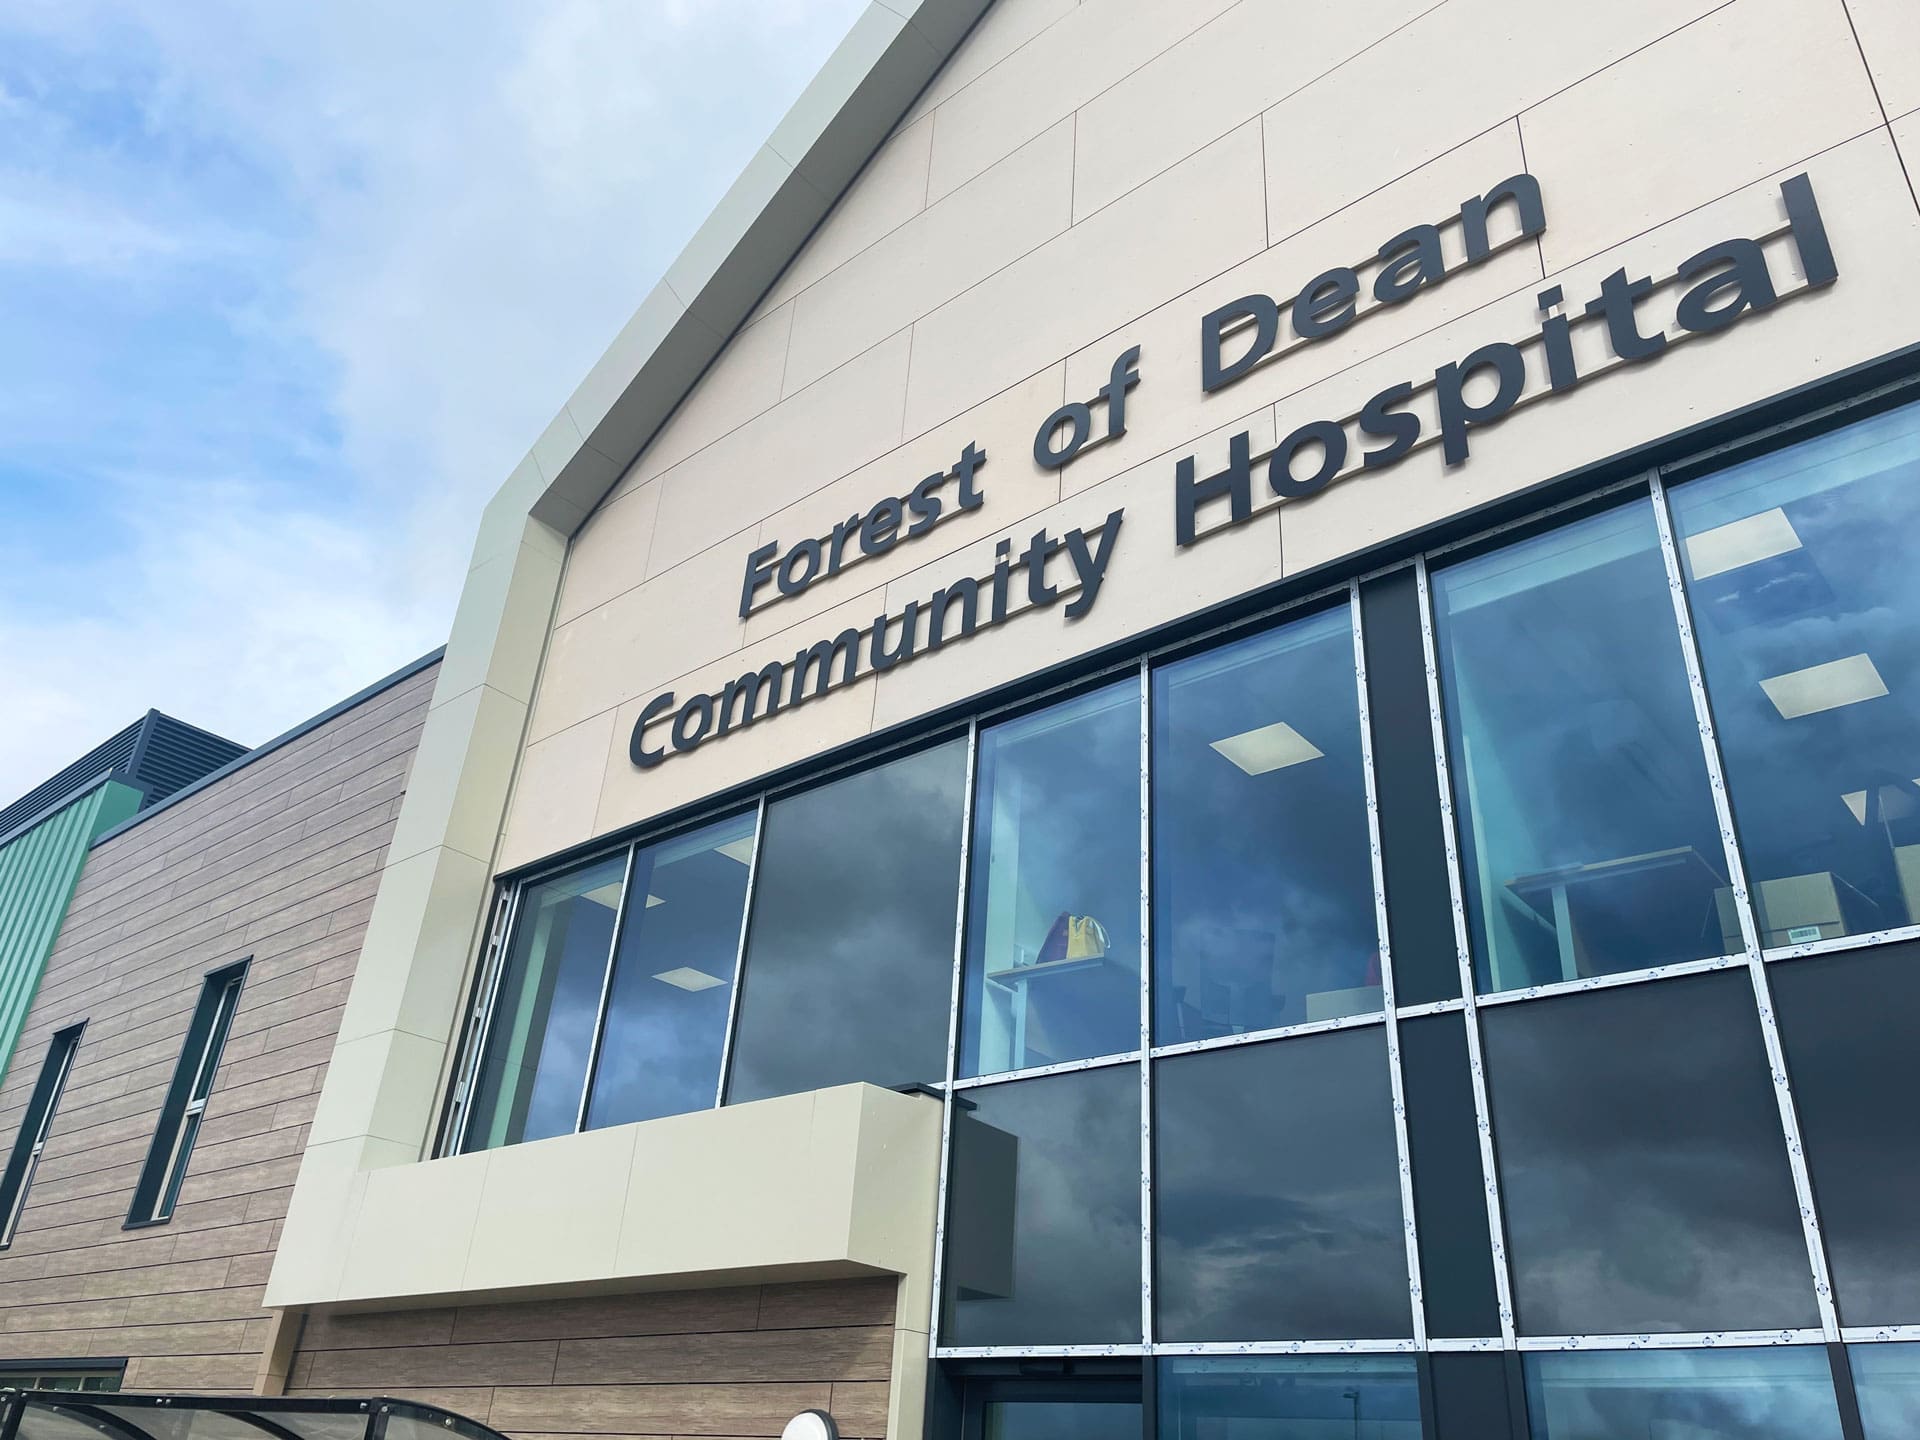 Forest of Dean Community Hospital